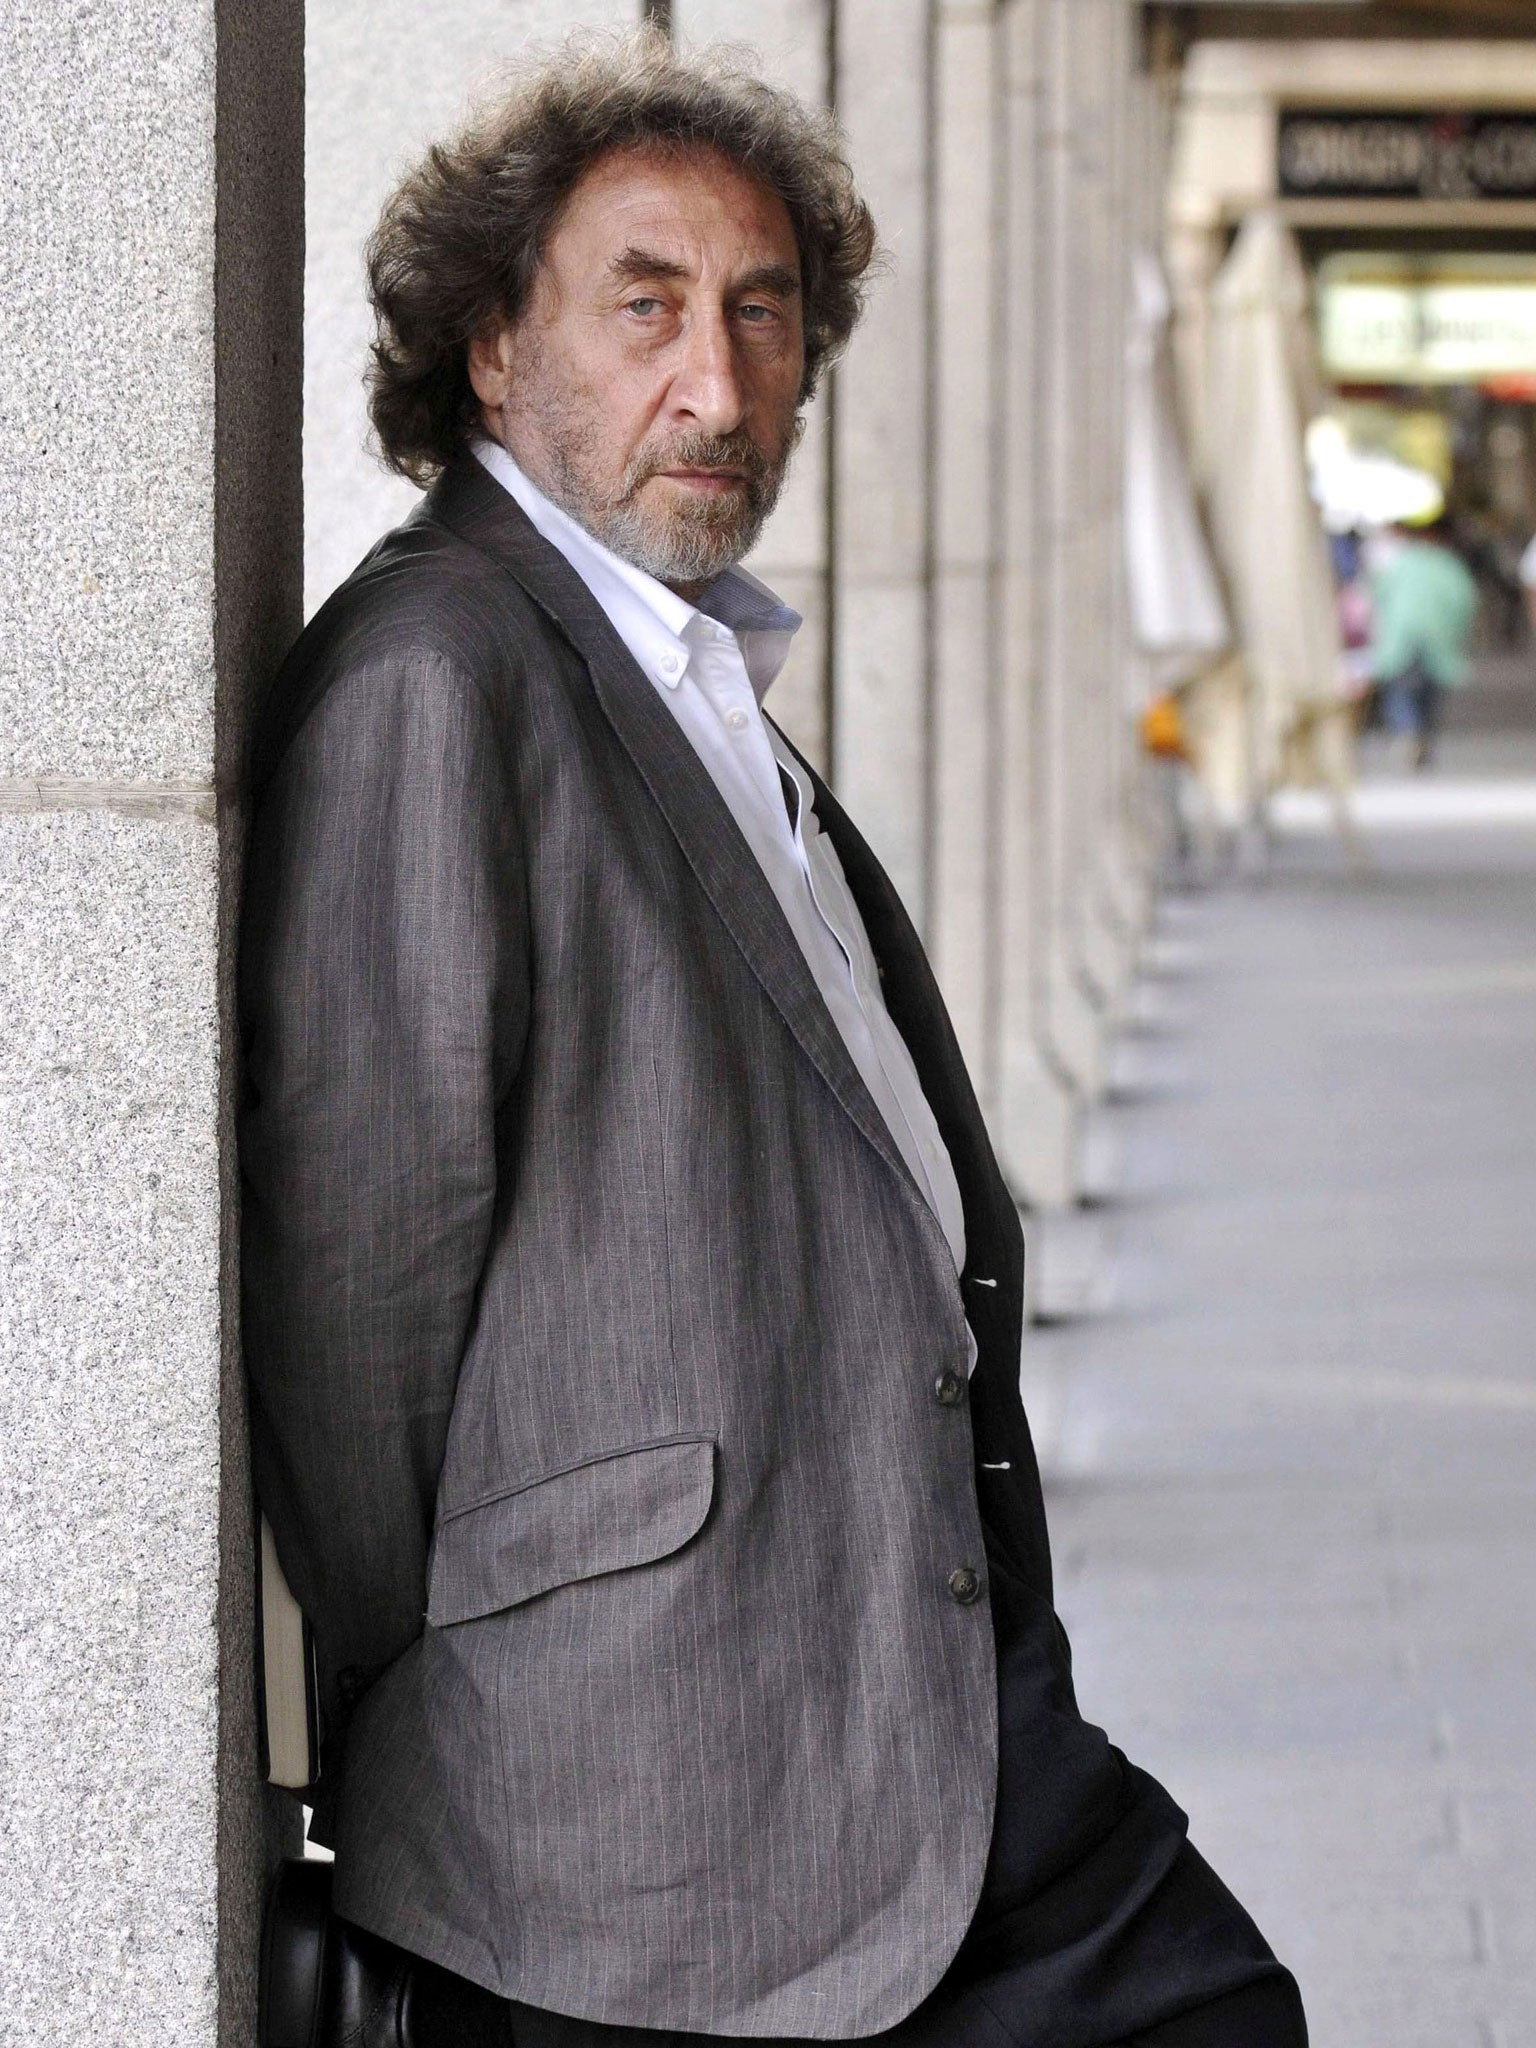 Howard Jacobson won the Man Booker Prize in 2010